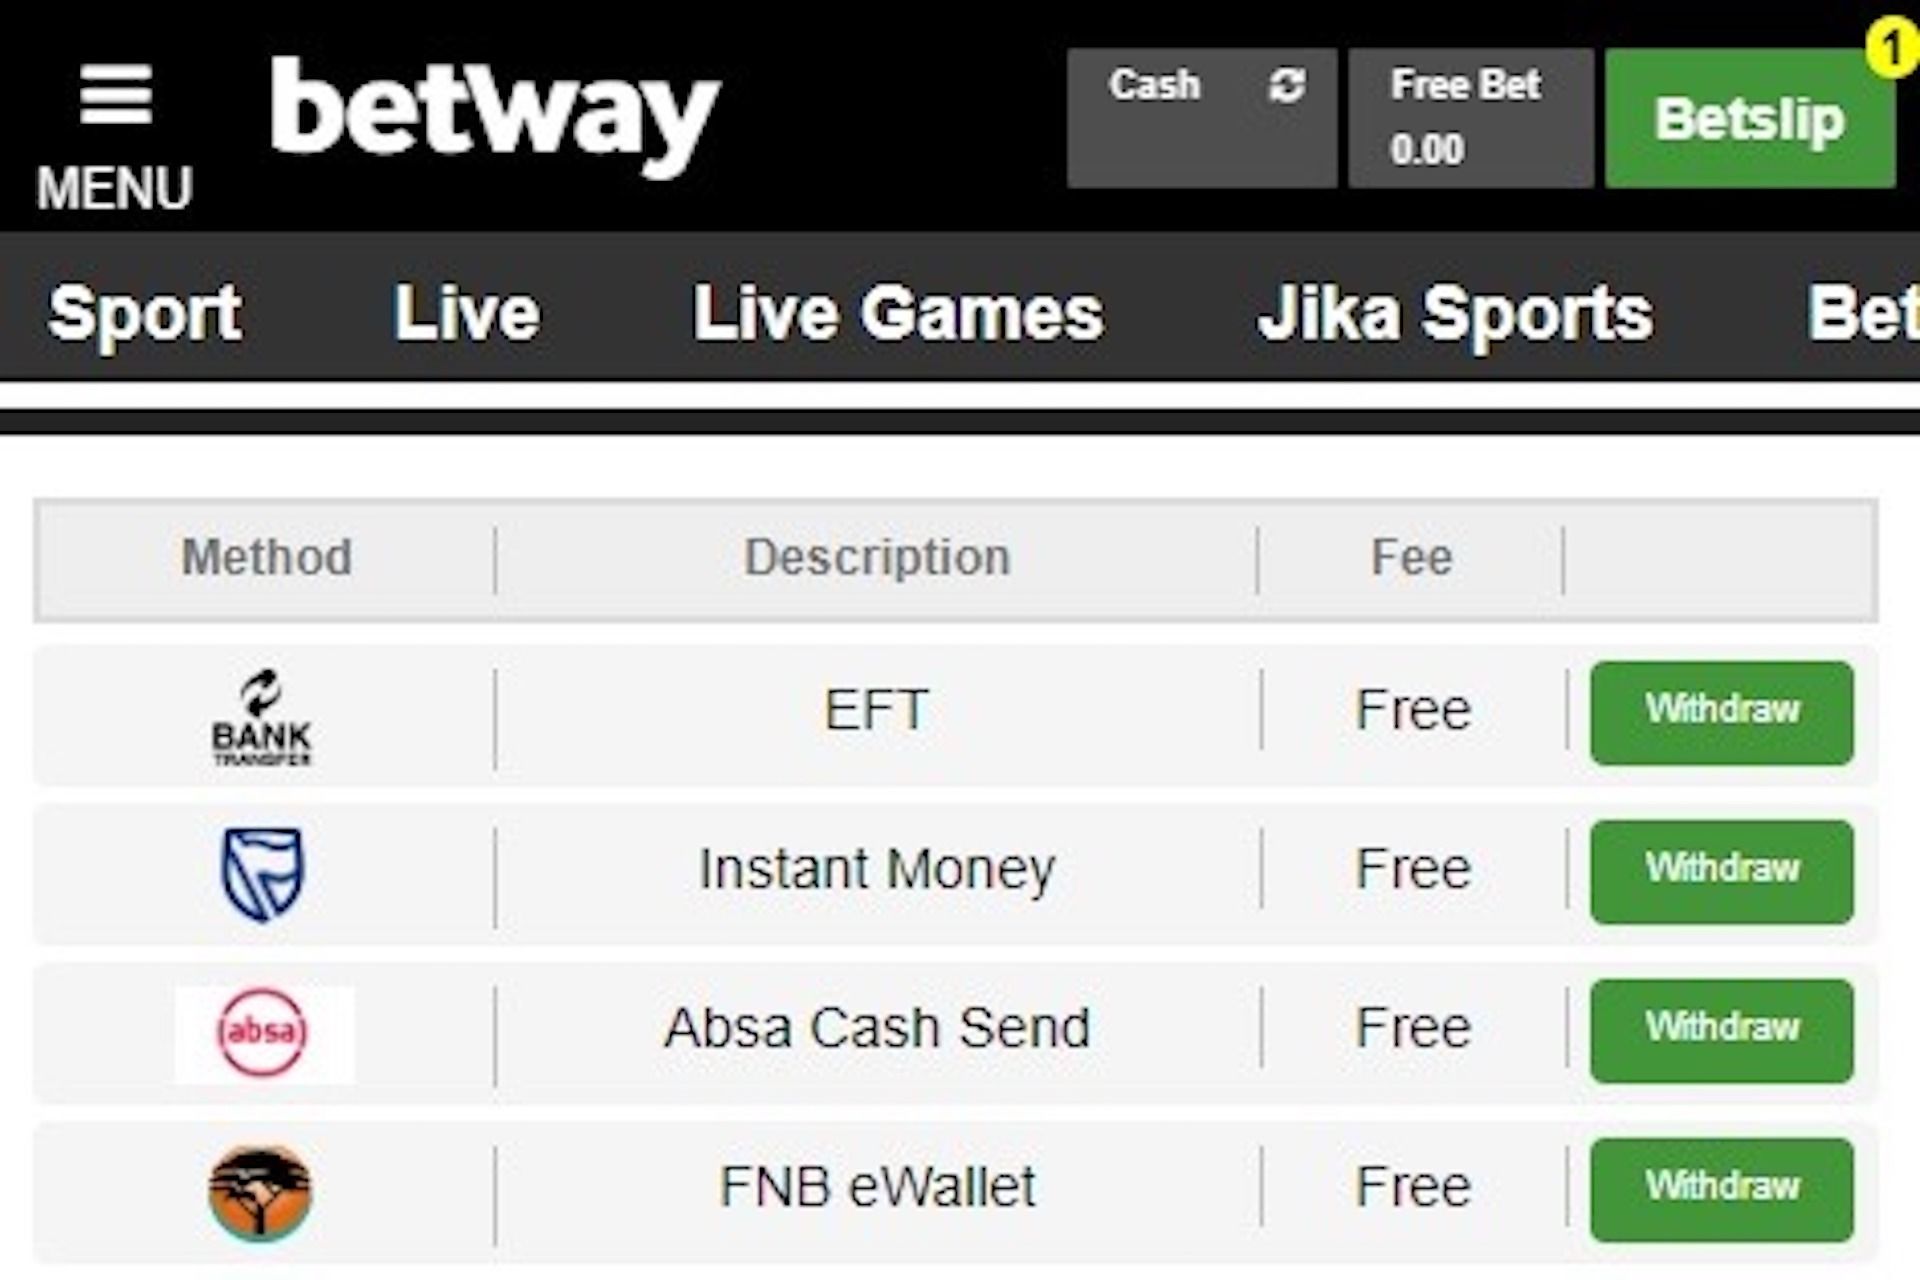 betway-e-wallet-withdrawal-how-long-does-it-take